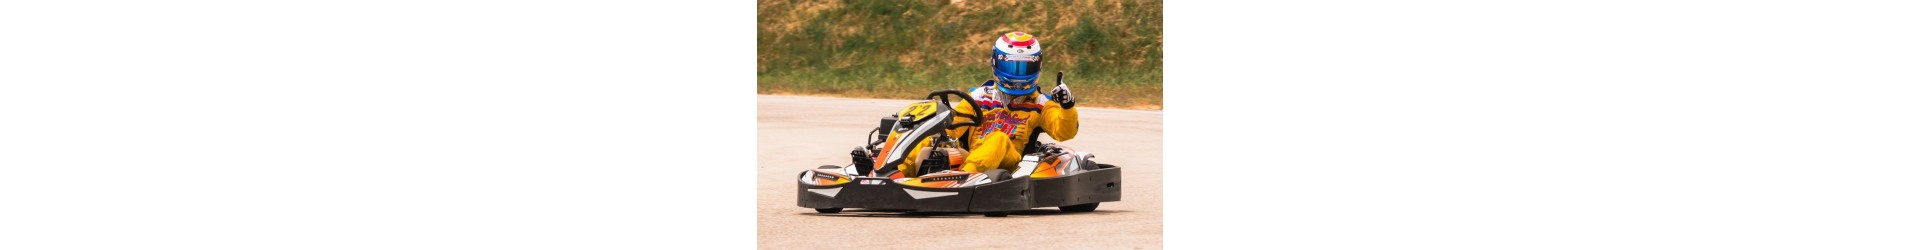 Karting Thrills: Feel the Adrenaline and Race on the Track! AVEMTO